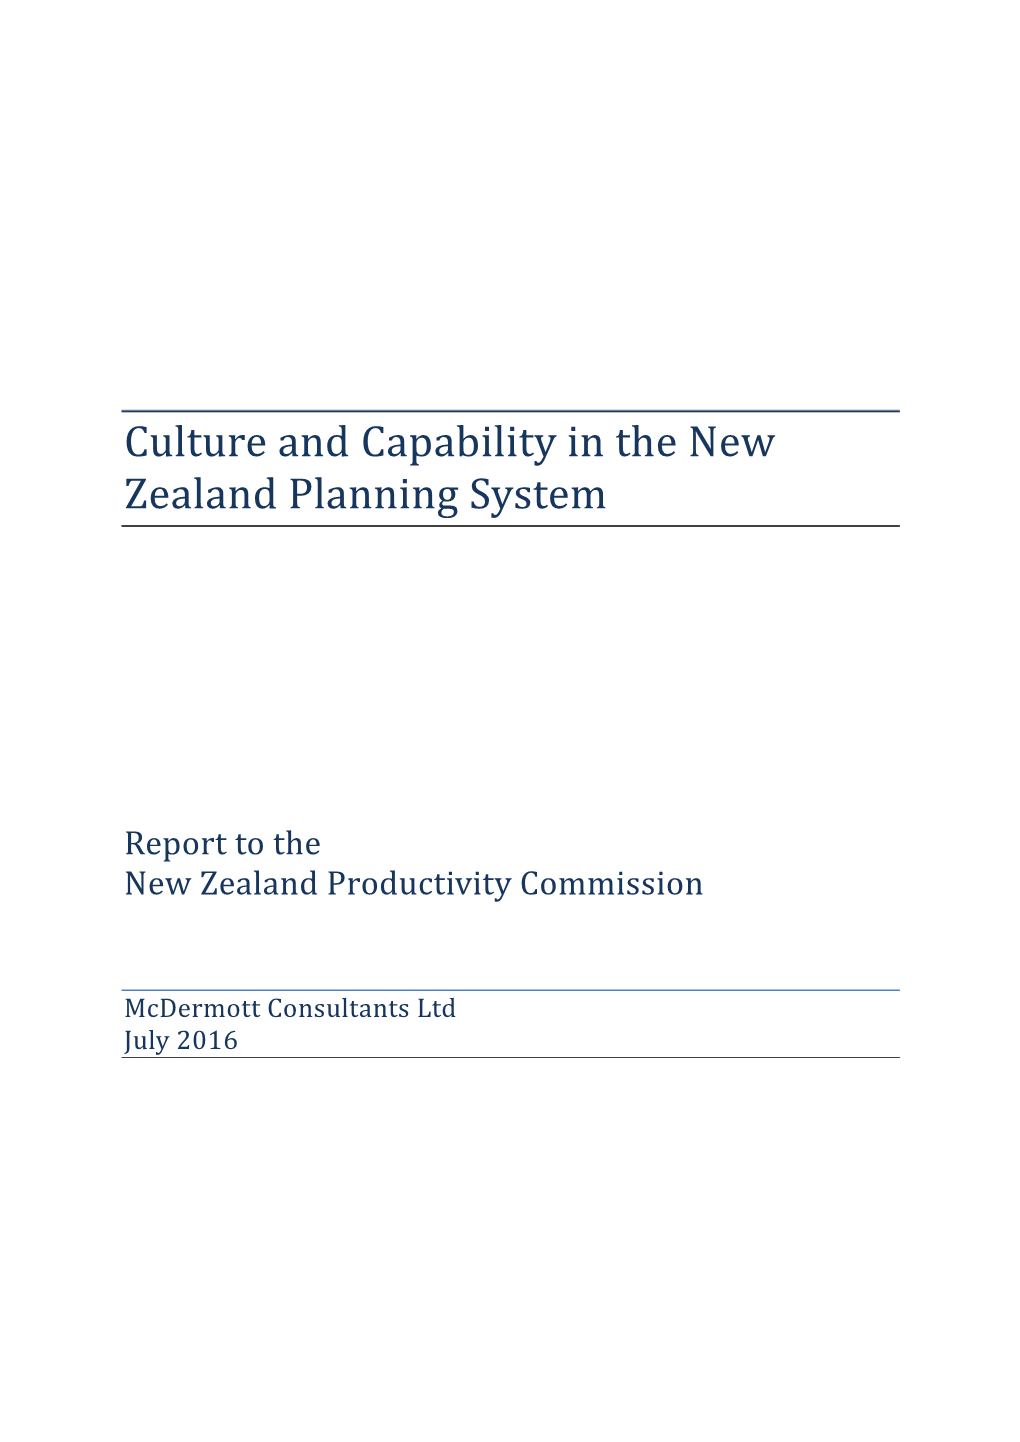 Mcdermott, P. Culture and Capability in the New Zealand Planning System